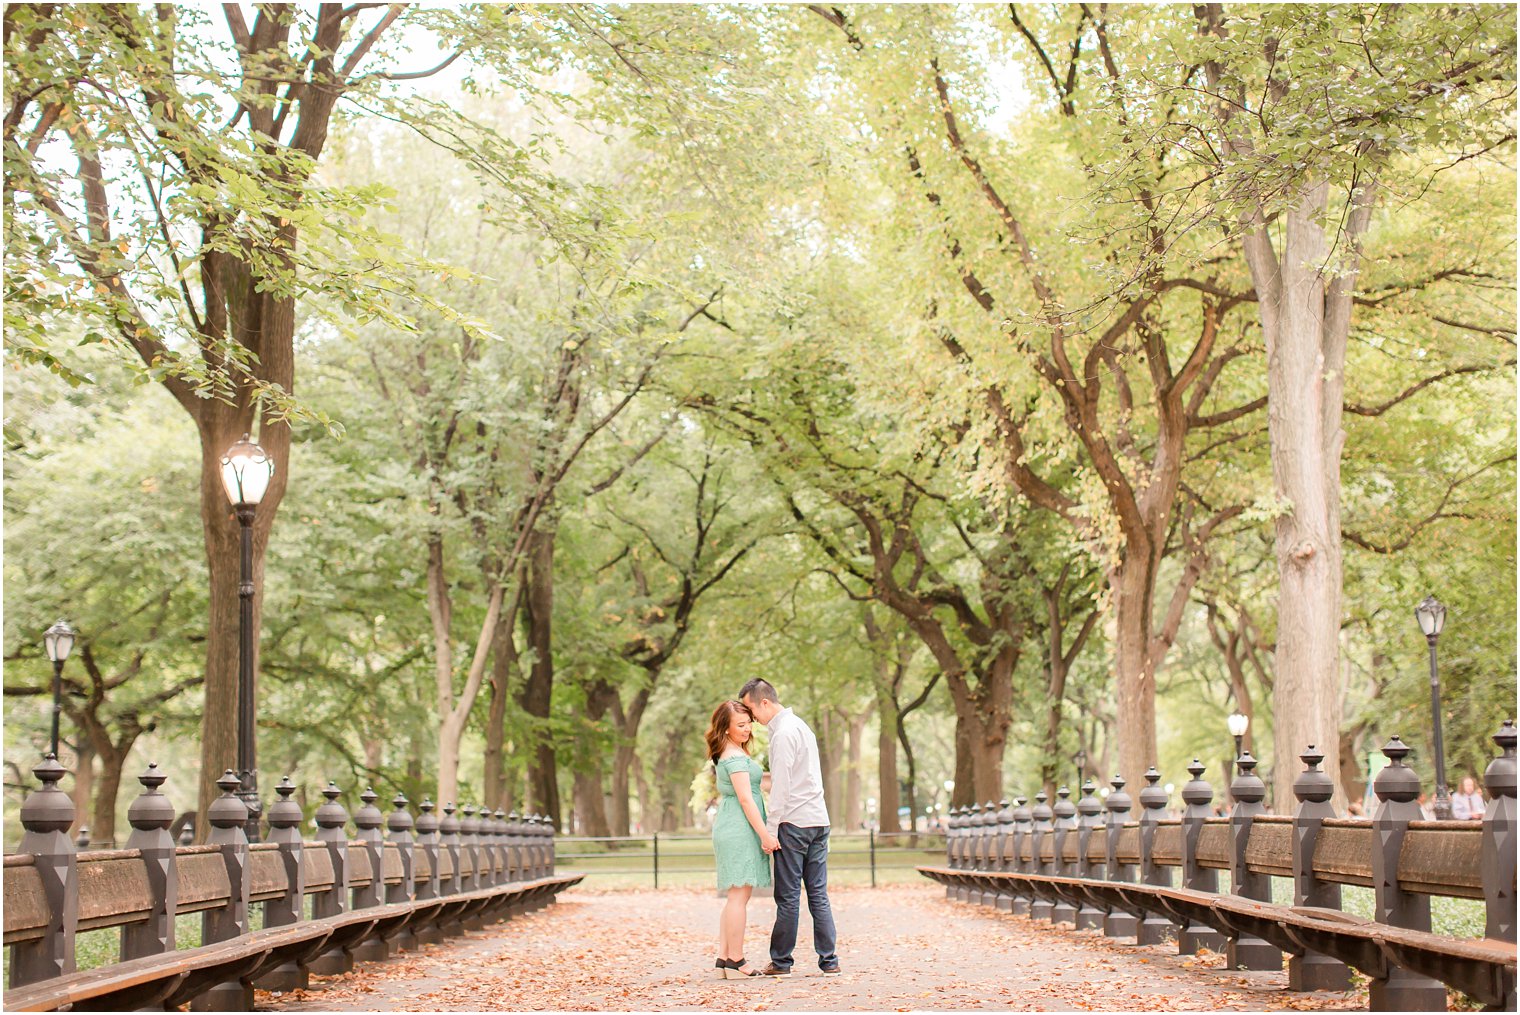 Romantic photo in Central Park by Idalia Photography